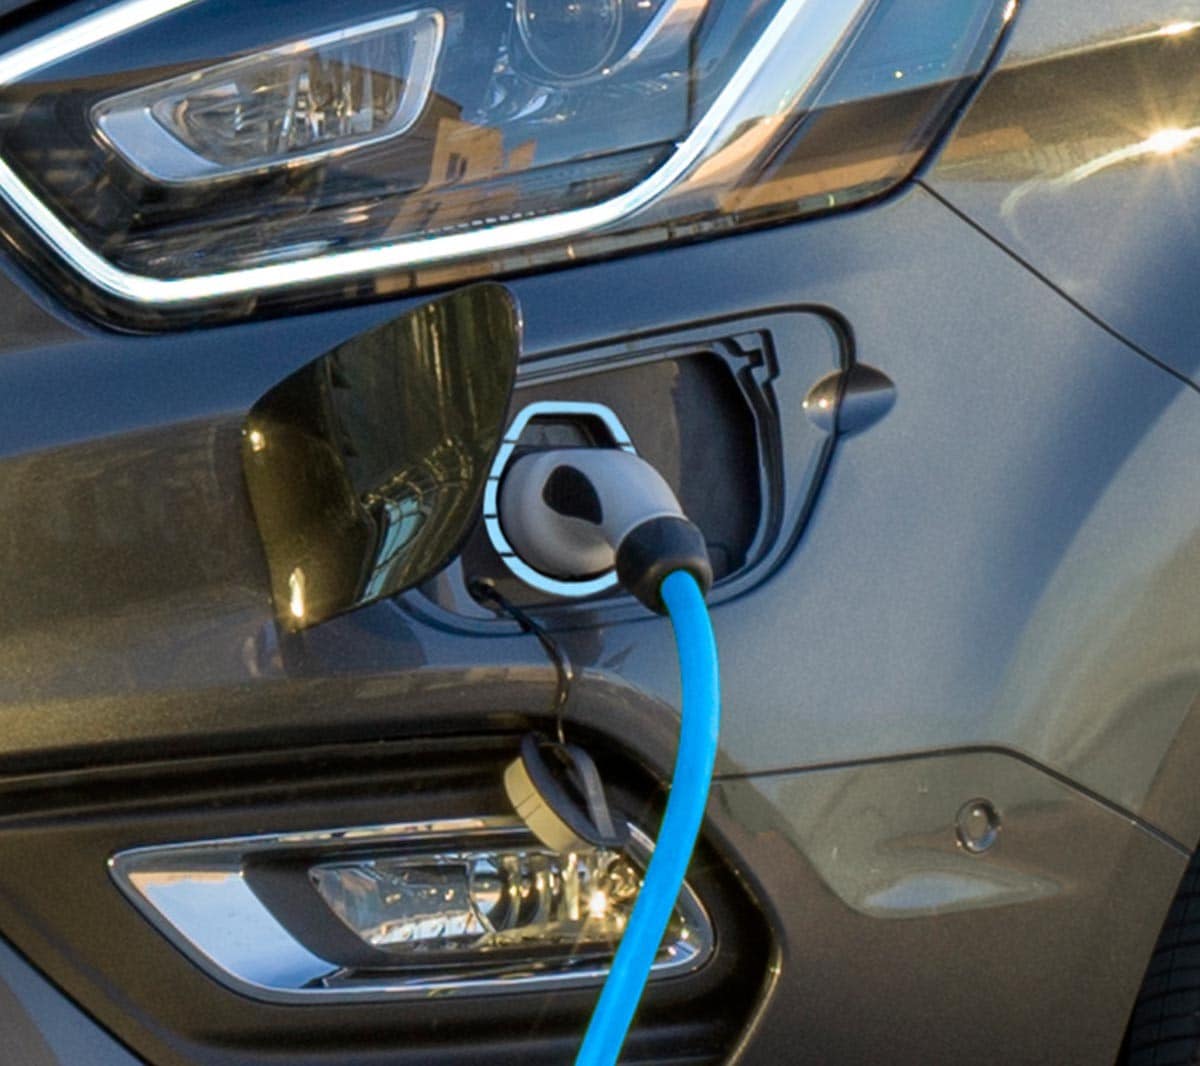 New Tourneo Custom PHEV charging point close up